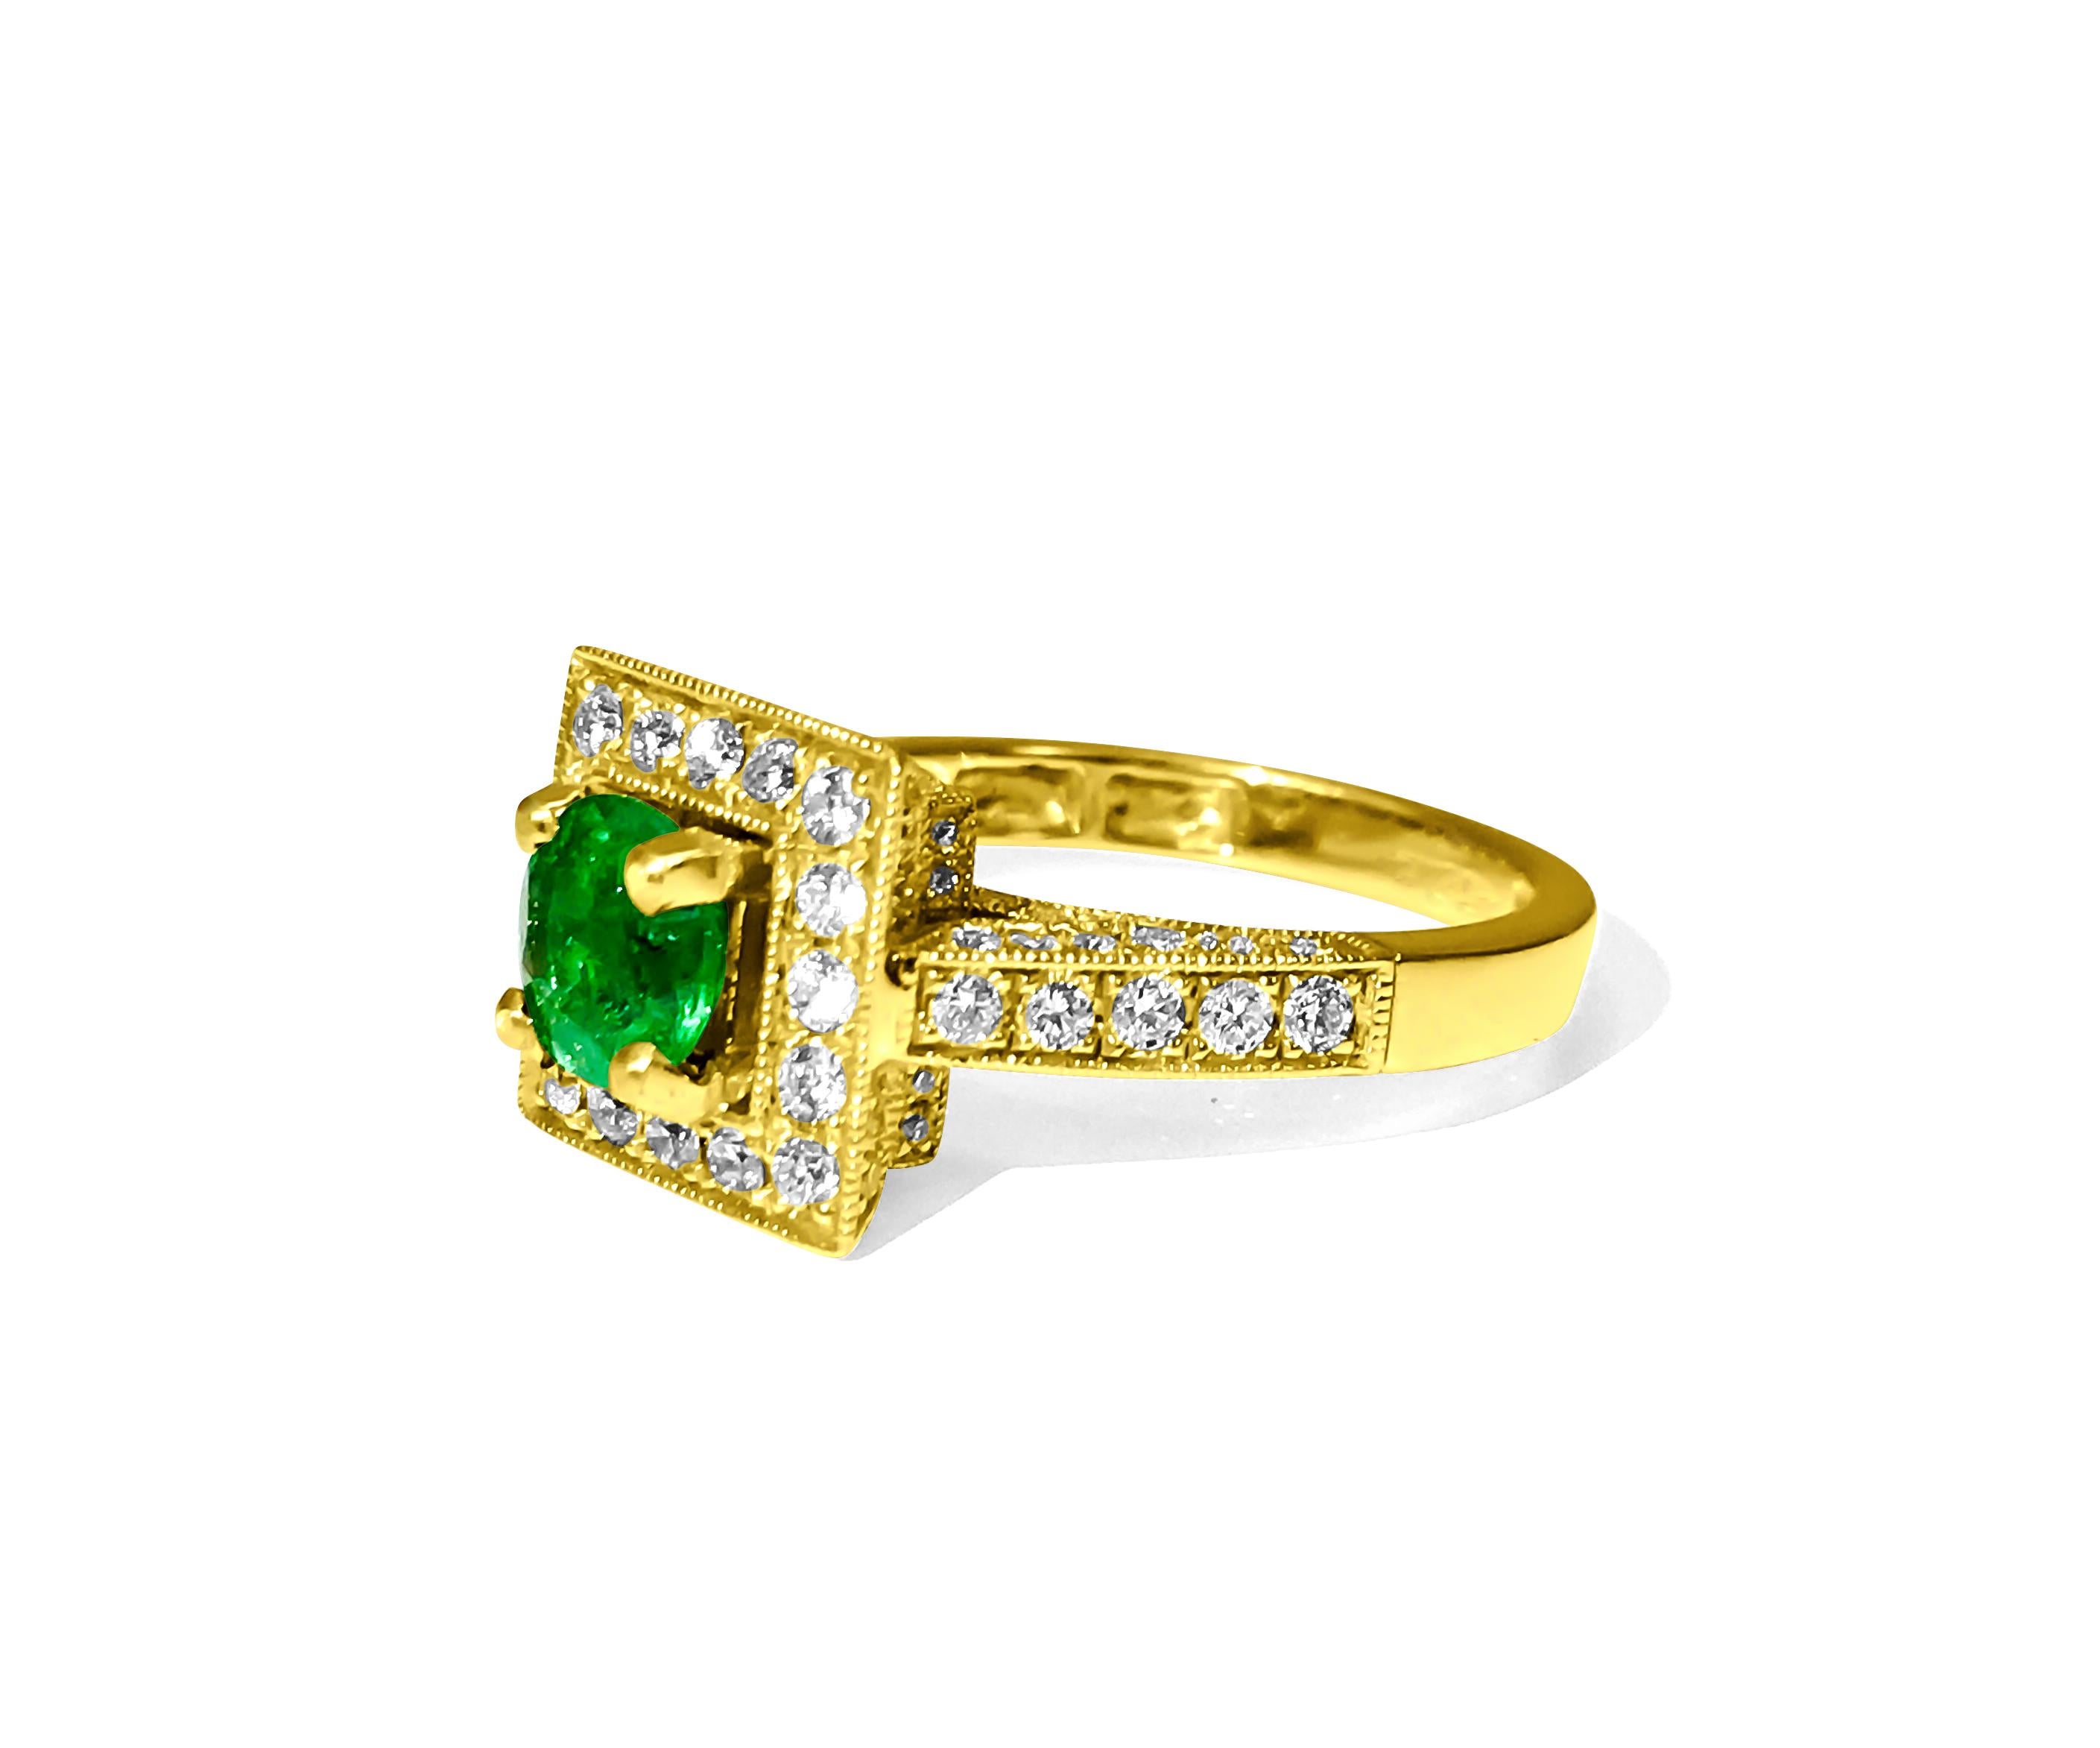 Discover timeless elegance with this stunning vintage art deco style engagement ring. Crafted from luxurious 18k yellow gold, it features a dazzling 1.50 carat round emerald set delicately in prongs, showcasing its natural earth-mined beauty.